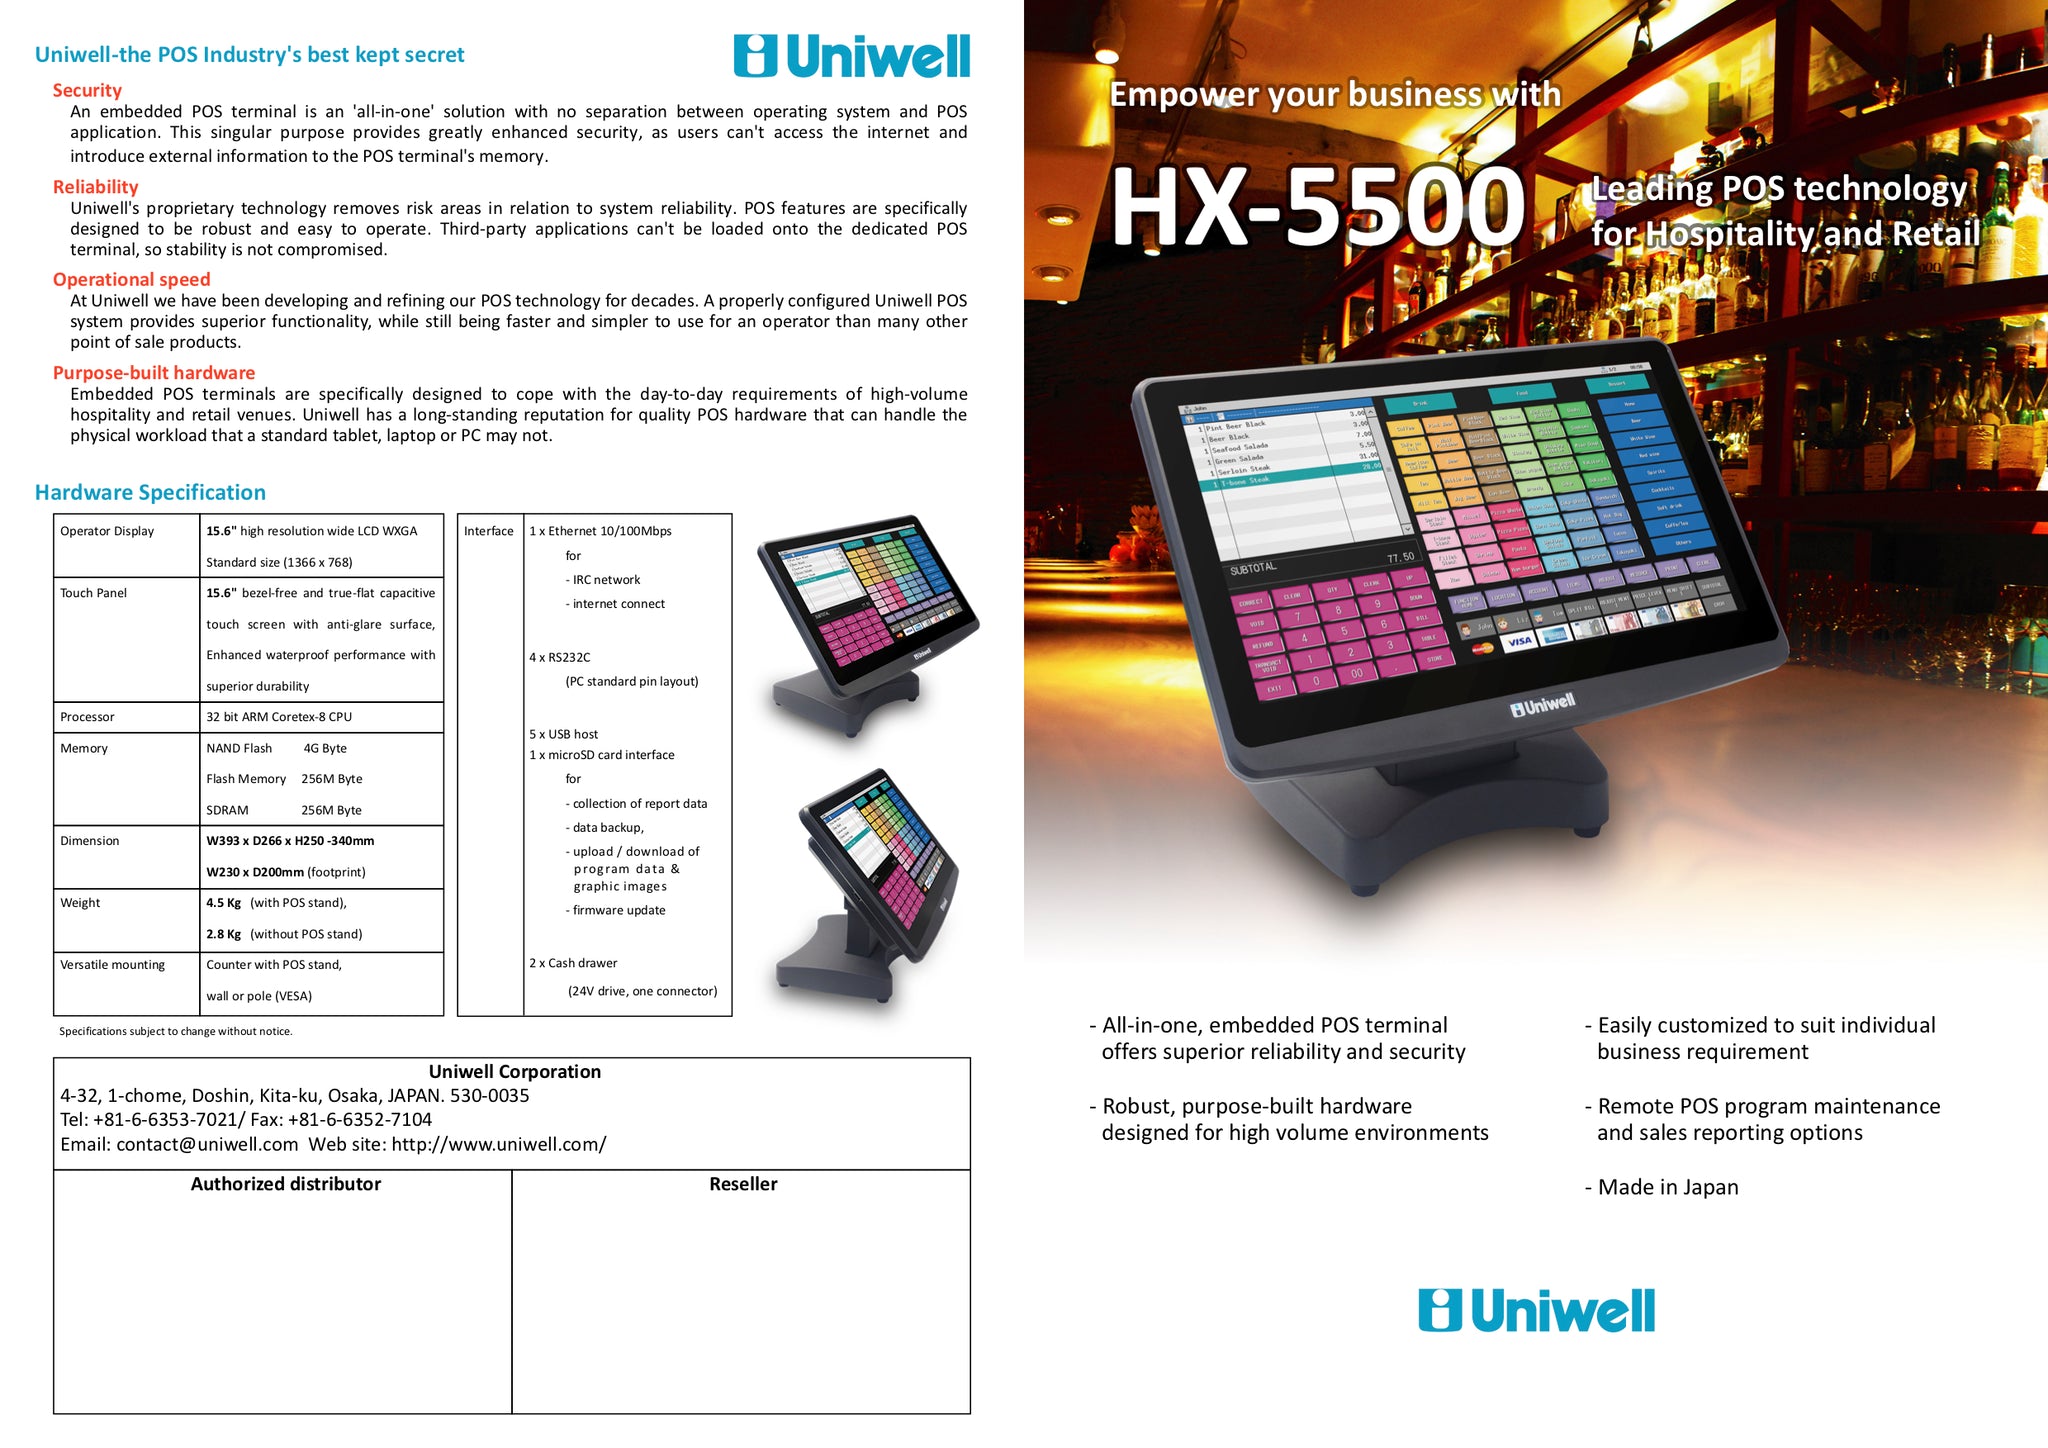 Uniwell Pamphlet 1